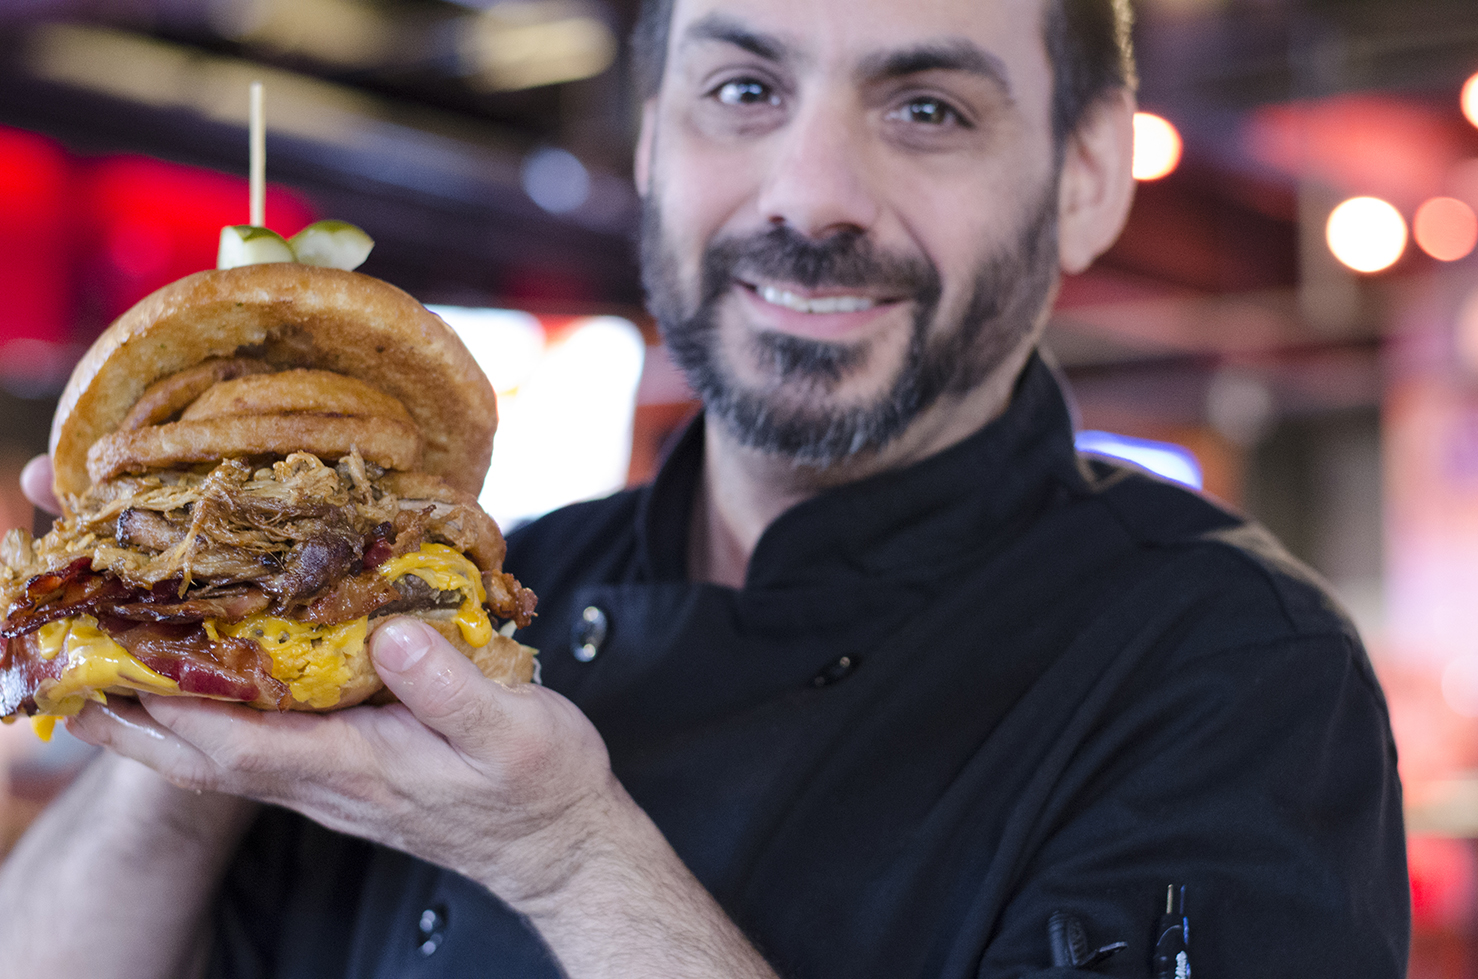 The Bull&#39;s 4lb Burger is roughly the size of chef <b>Scot Brooks</b>&#39; head - Bull-Barrel-Burger-2015-281